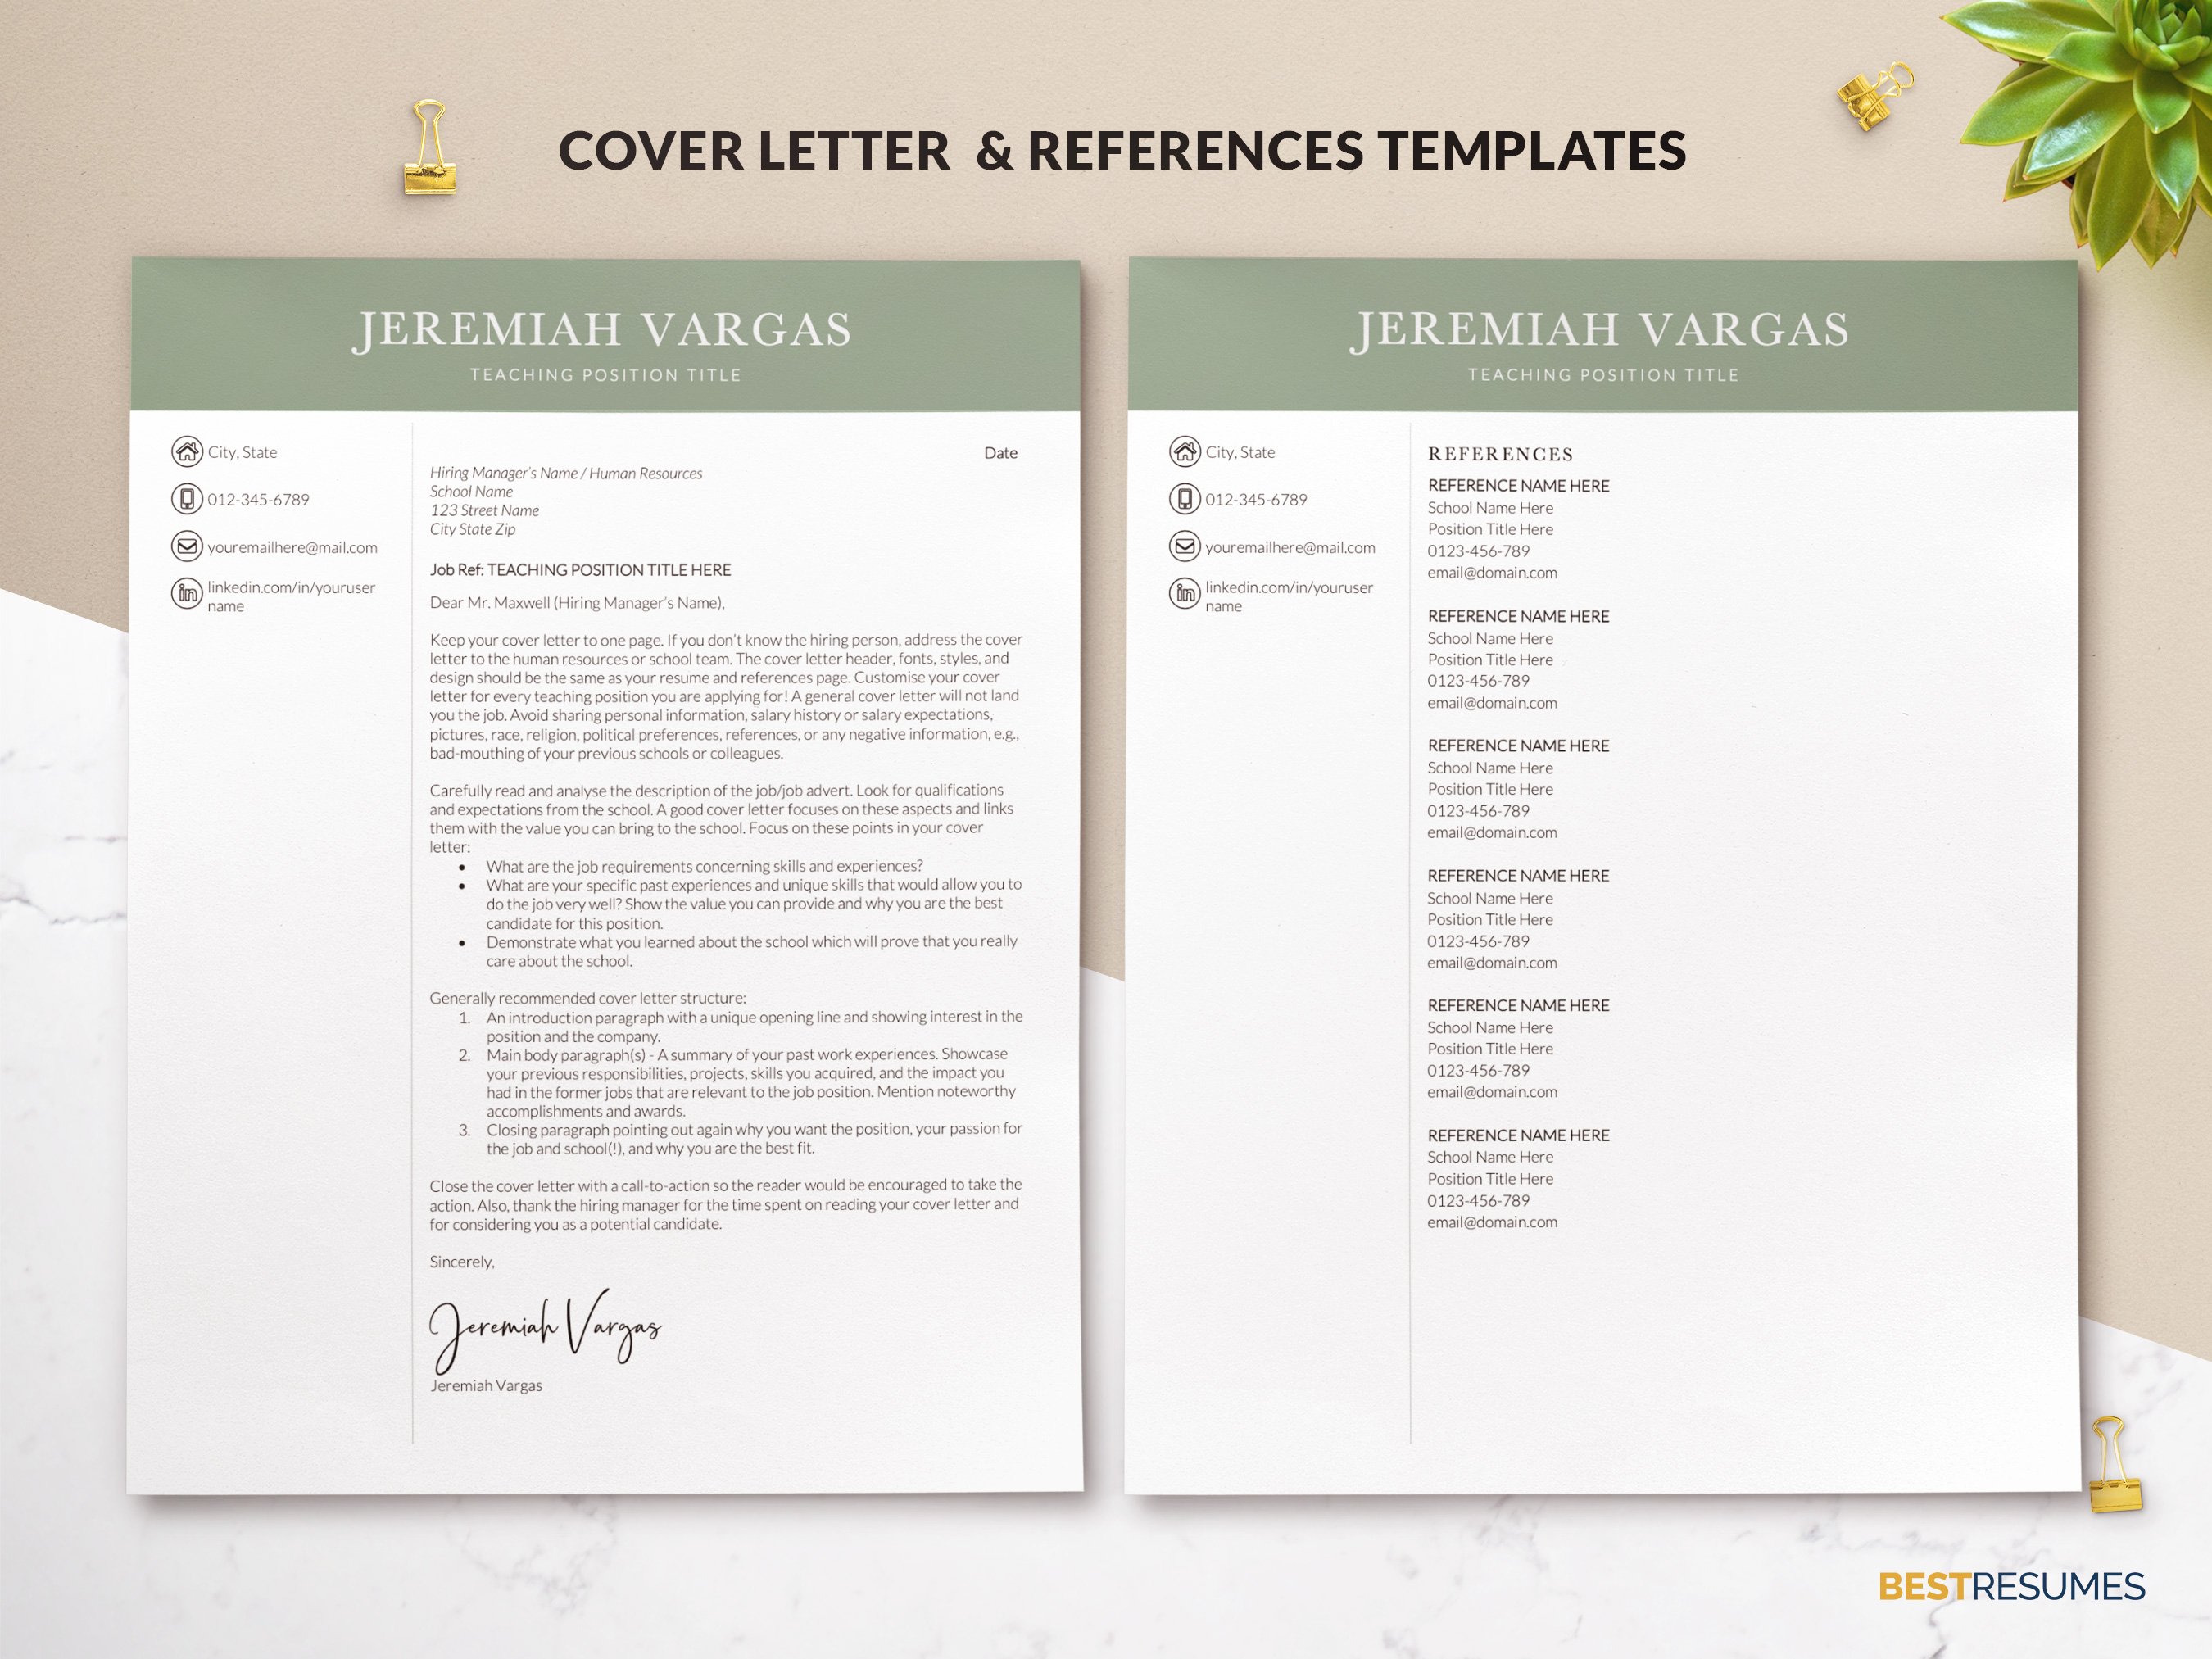 resume template for teachers cover letter references templates jeremiah vargas 683